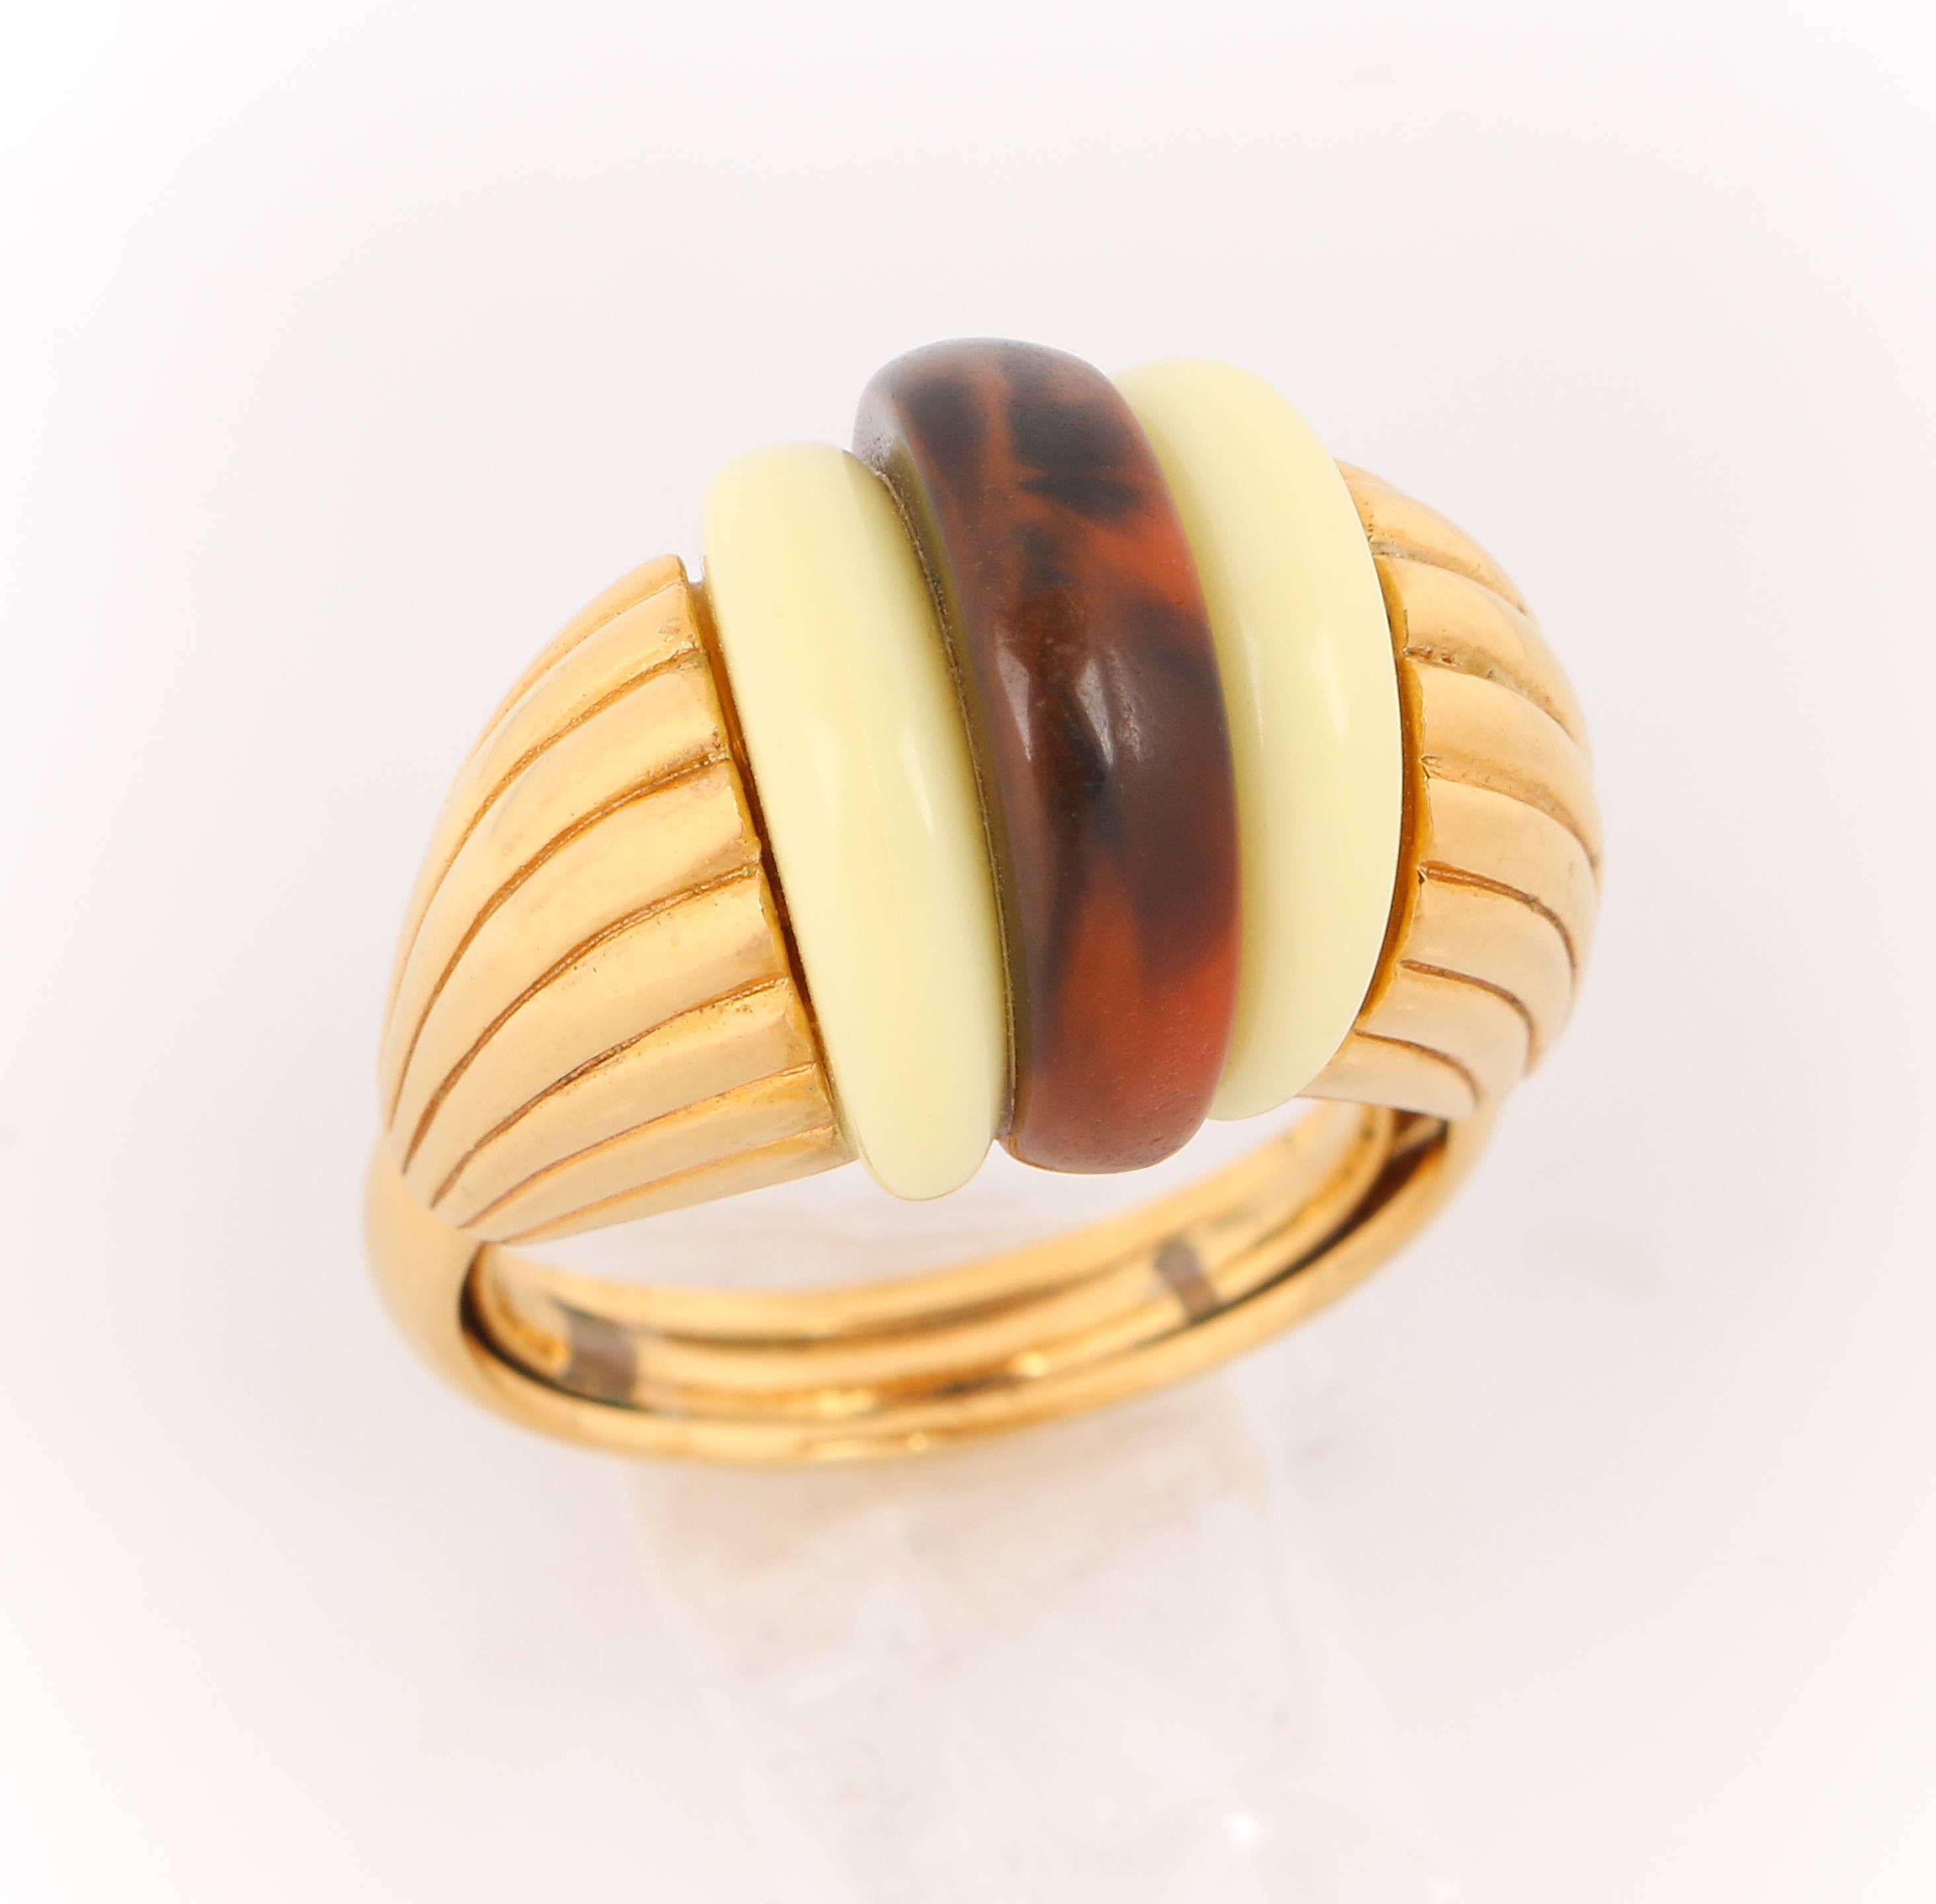 Vintage Lanvin c.1970's gold art deco styled dome ring. Plastic ivory and brown tortoiseshell thin domed center stones. Gold ridged clam shell setting. Thin gold band with interior prongs for size adjustment. Marked: "Lanvin". Unmarked